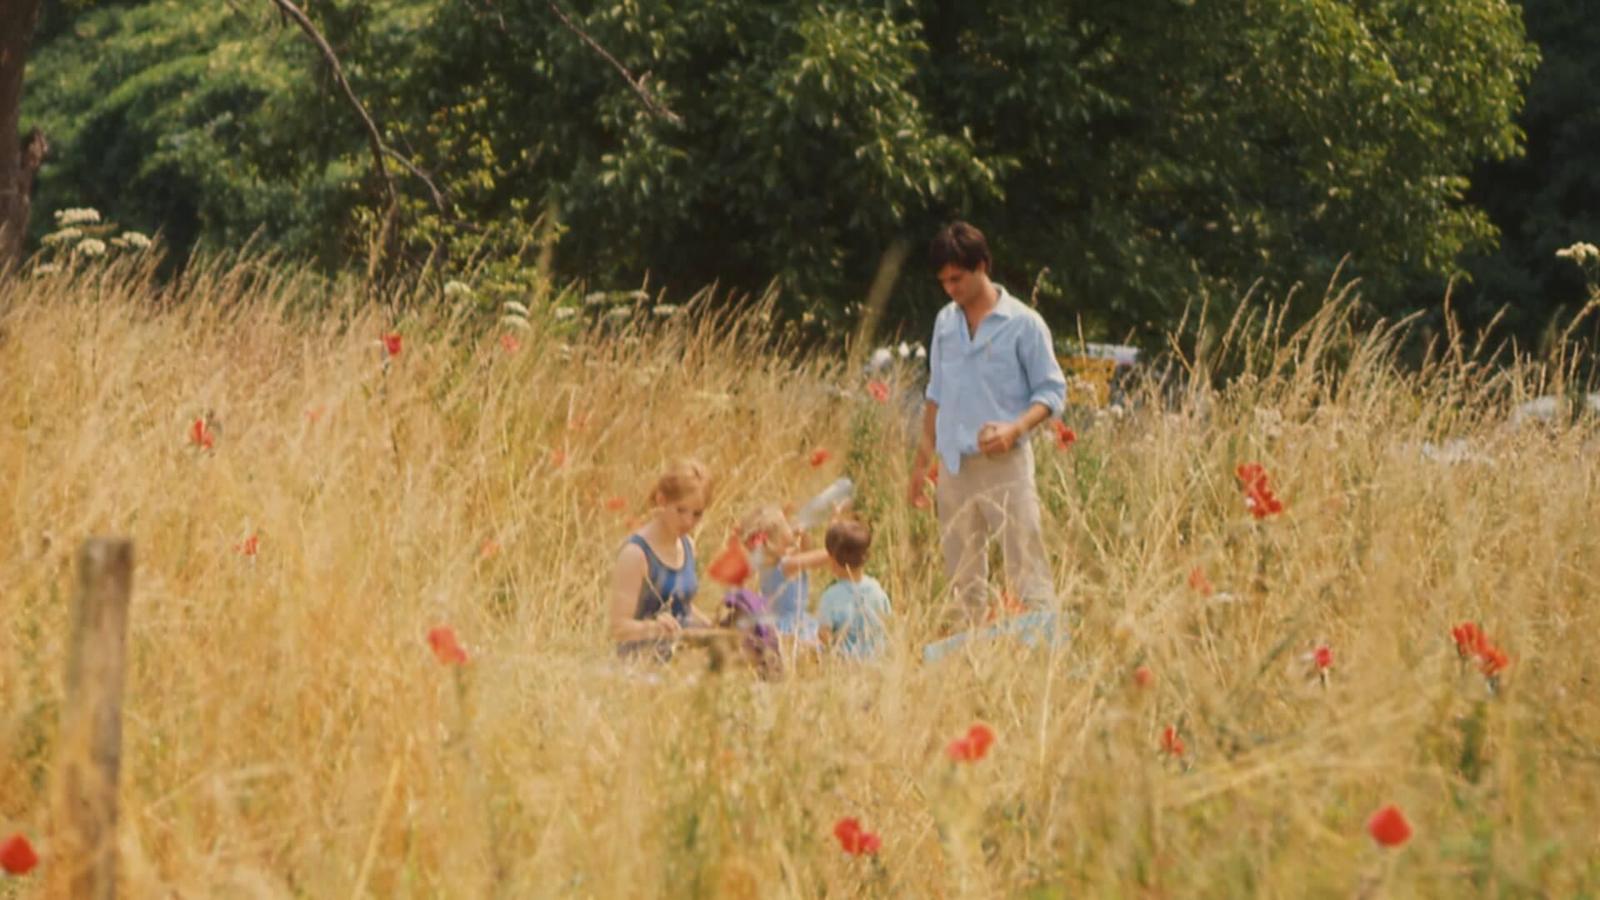 A man stands in a yellow field next to a woman and a young child, surrounded by red summer flowers